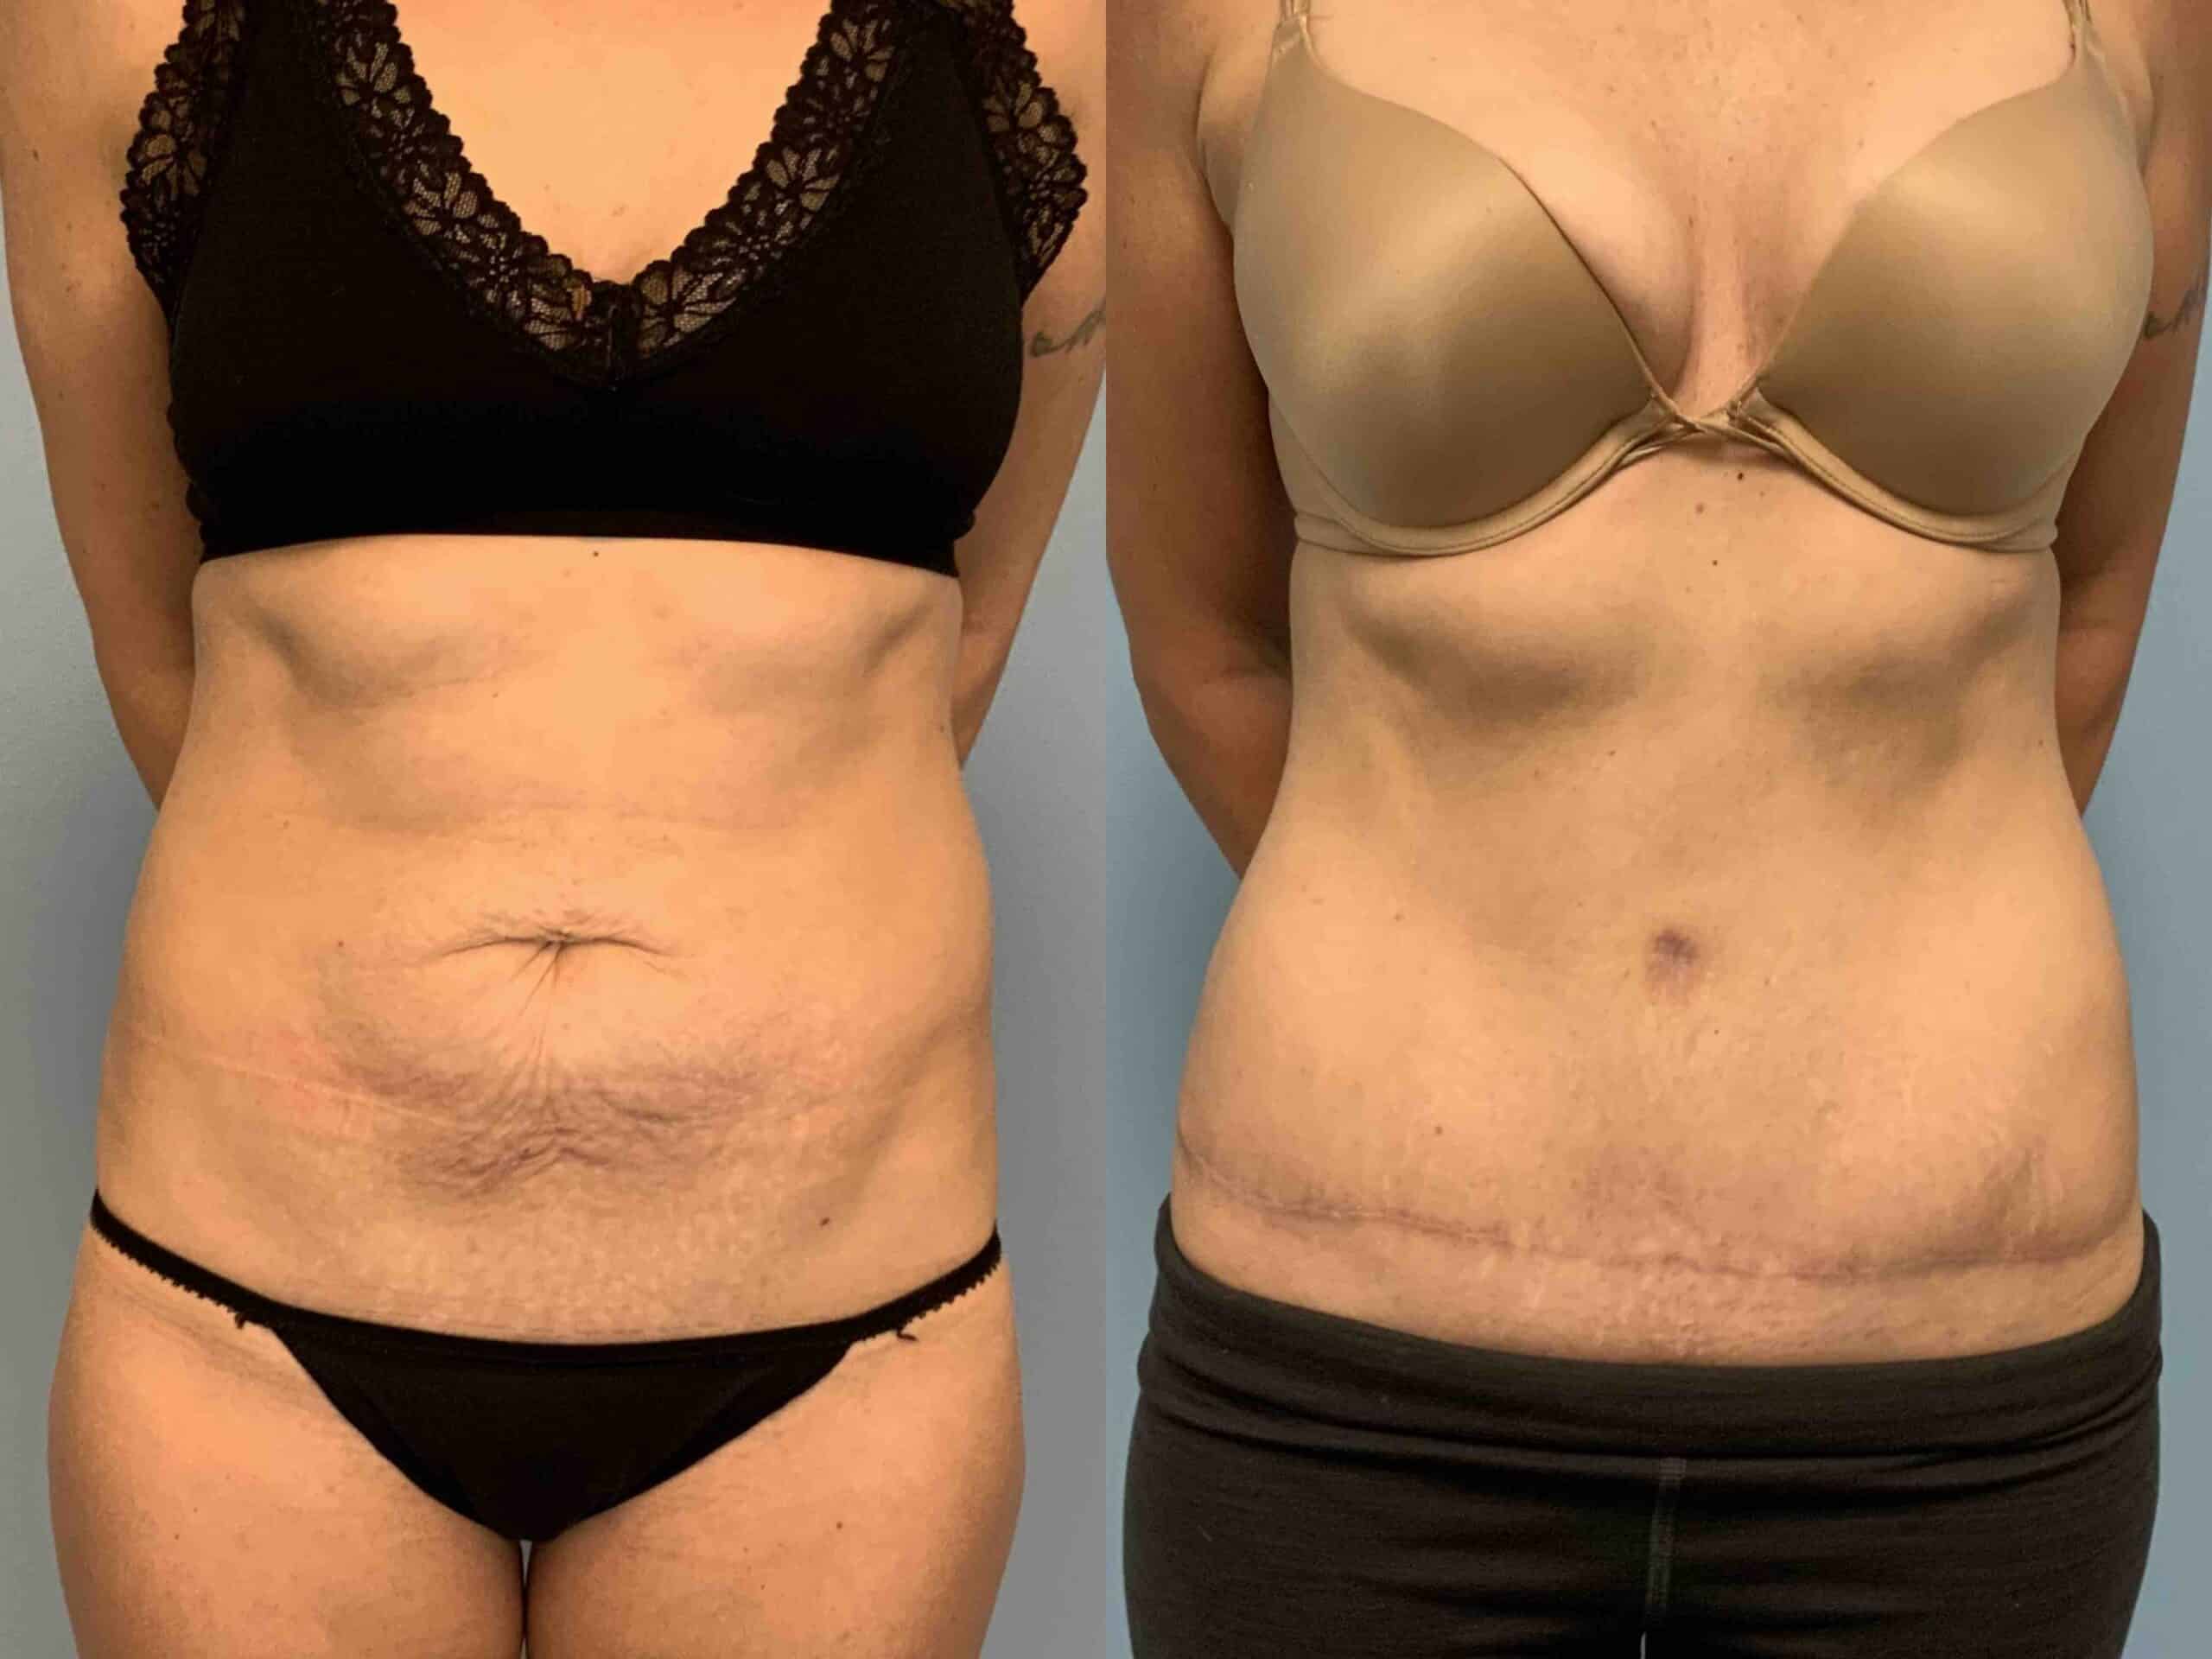 Before and after, patient 5 mo post op from Renuvion Abdomen and Flanks, VASER Abdomen and Flanks,Tummy Tuck with Umbilical Hernia Repair procedures performed by Dr. Paul Vanek